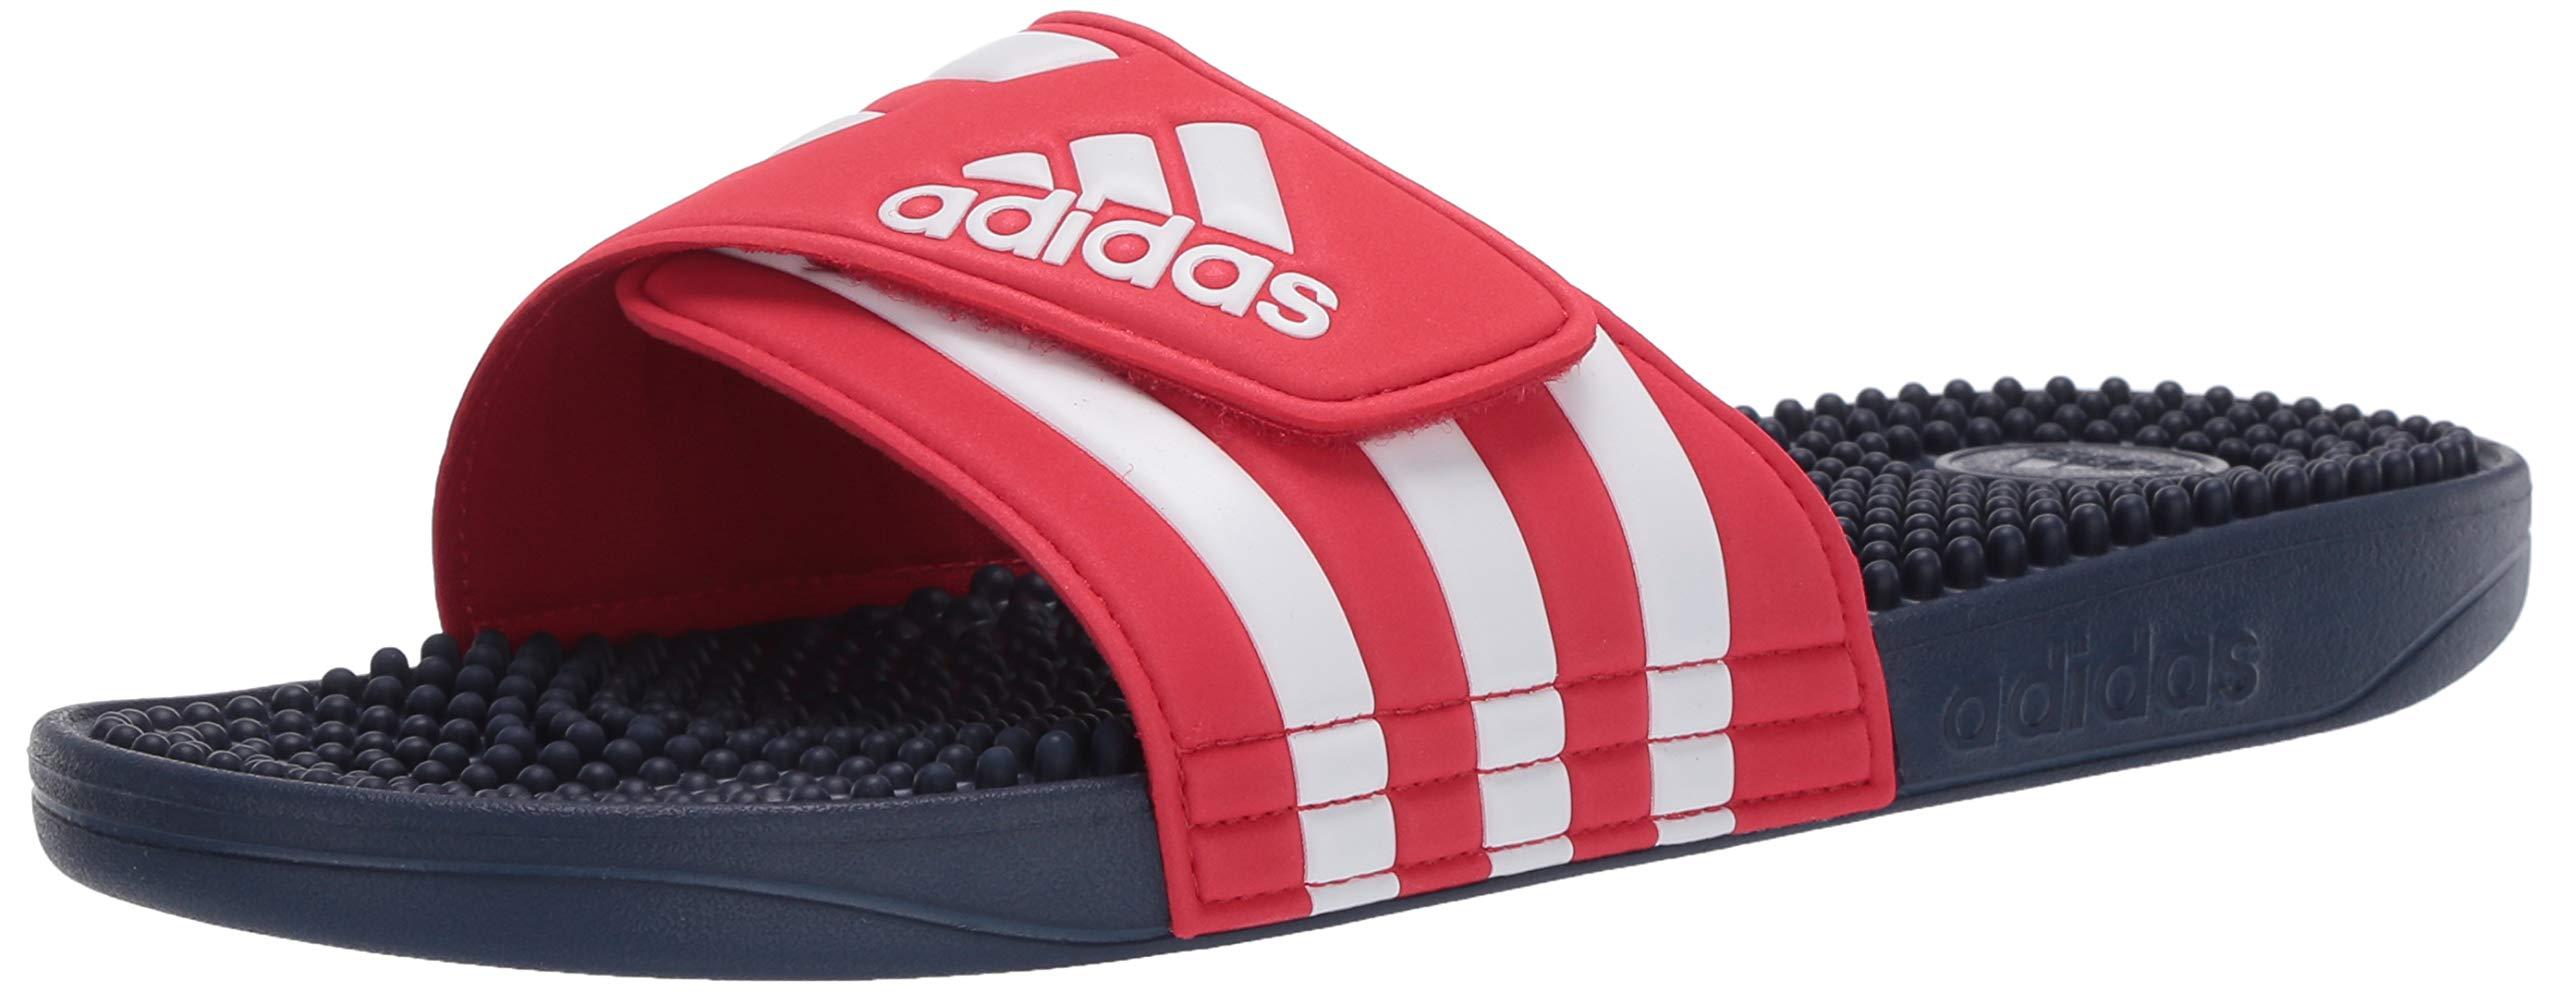 adidas 's Slide Sandal in Red Lyst